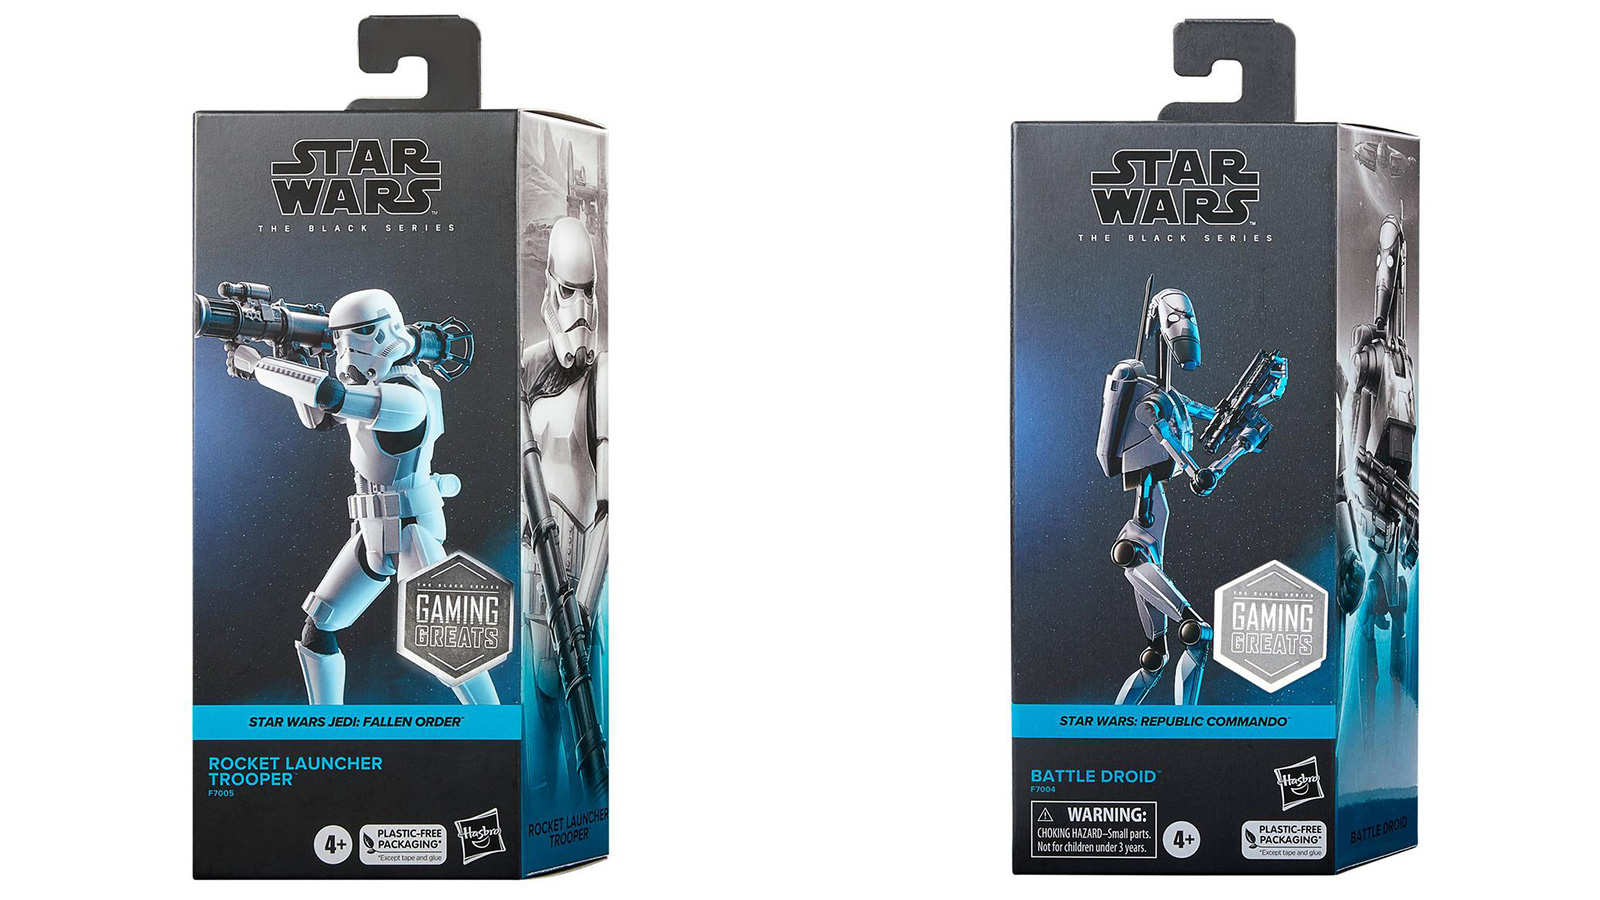 In Stock At Game Stop - New Exclusive TBS 6-Inch Gaming Greats Rocket Launcher Trooper & Republic Commando Battle Droid